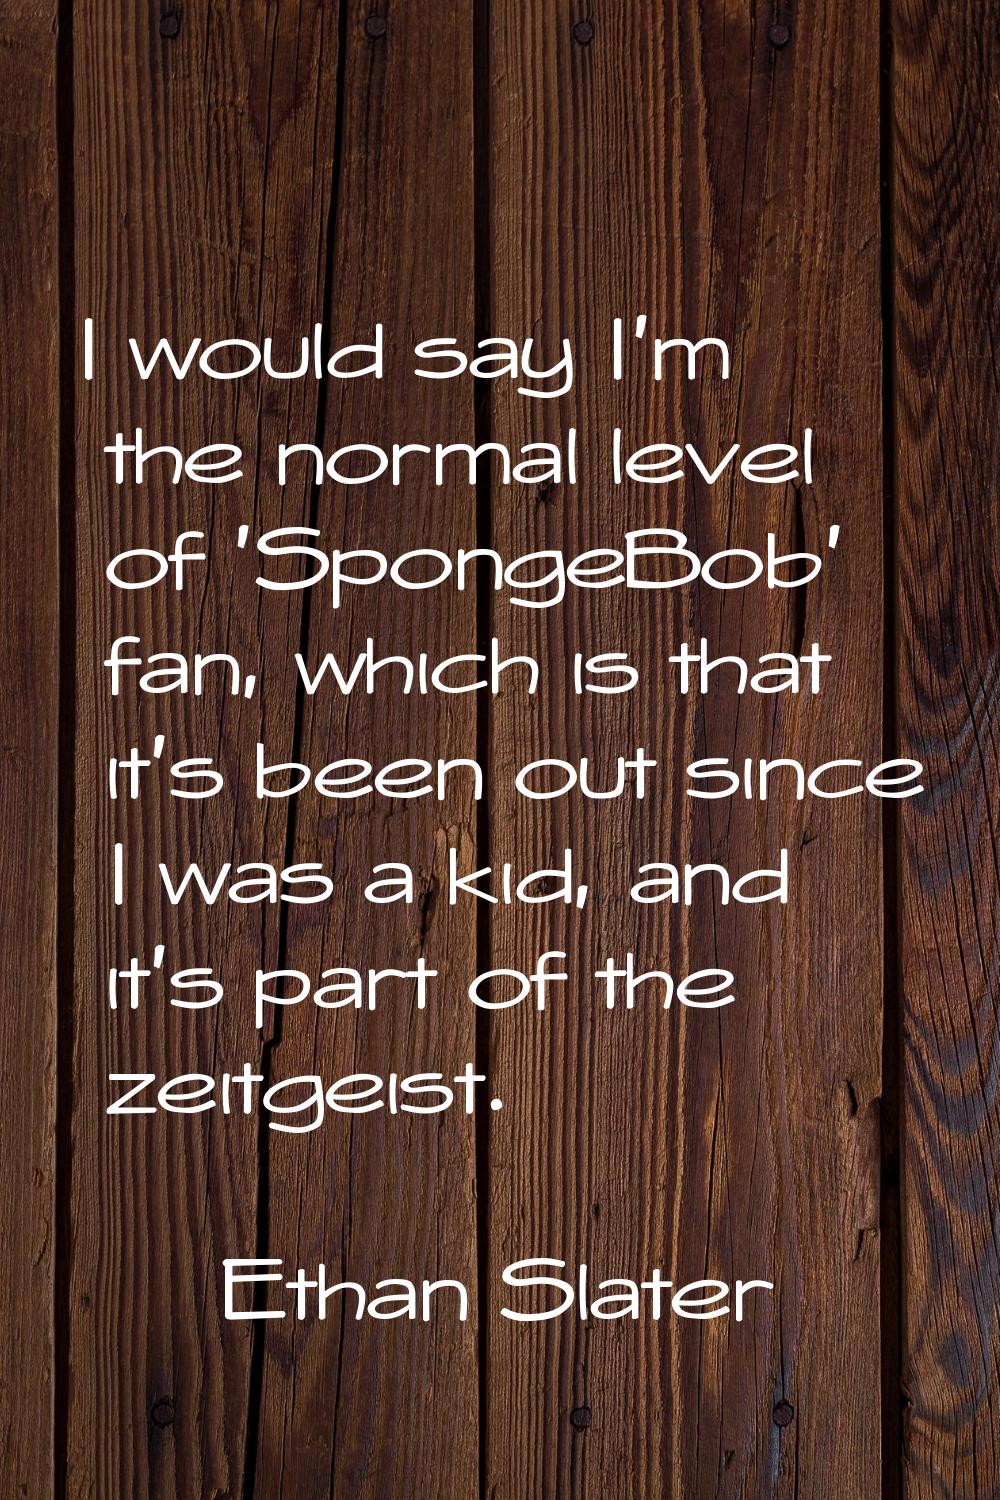 I would say I'm the normal level of 'SpongeBob' fan, which is that it's been out since I was a kid,